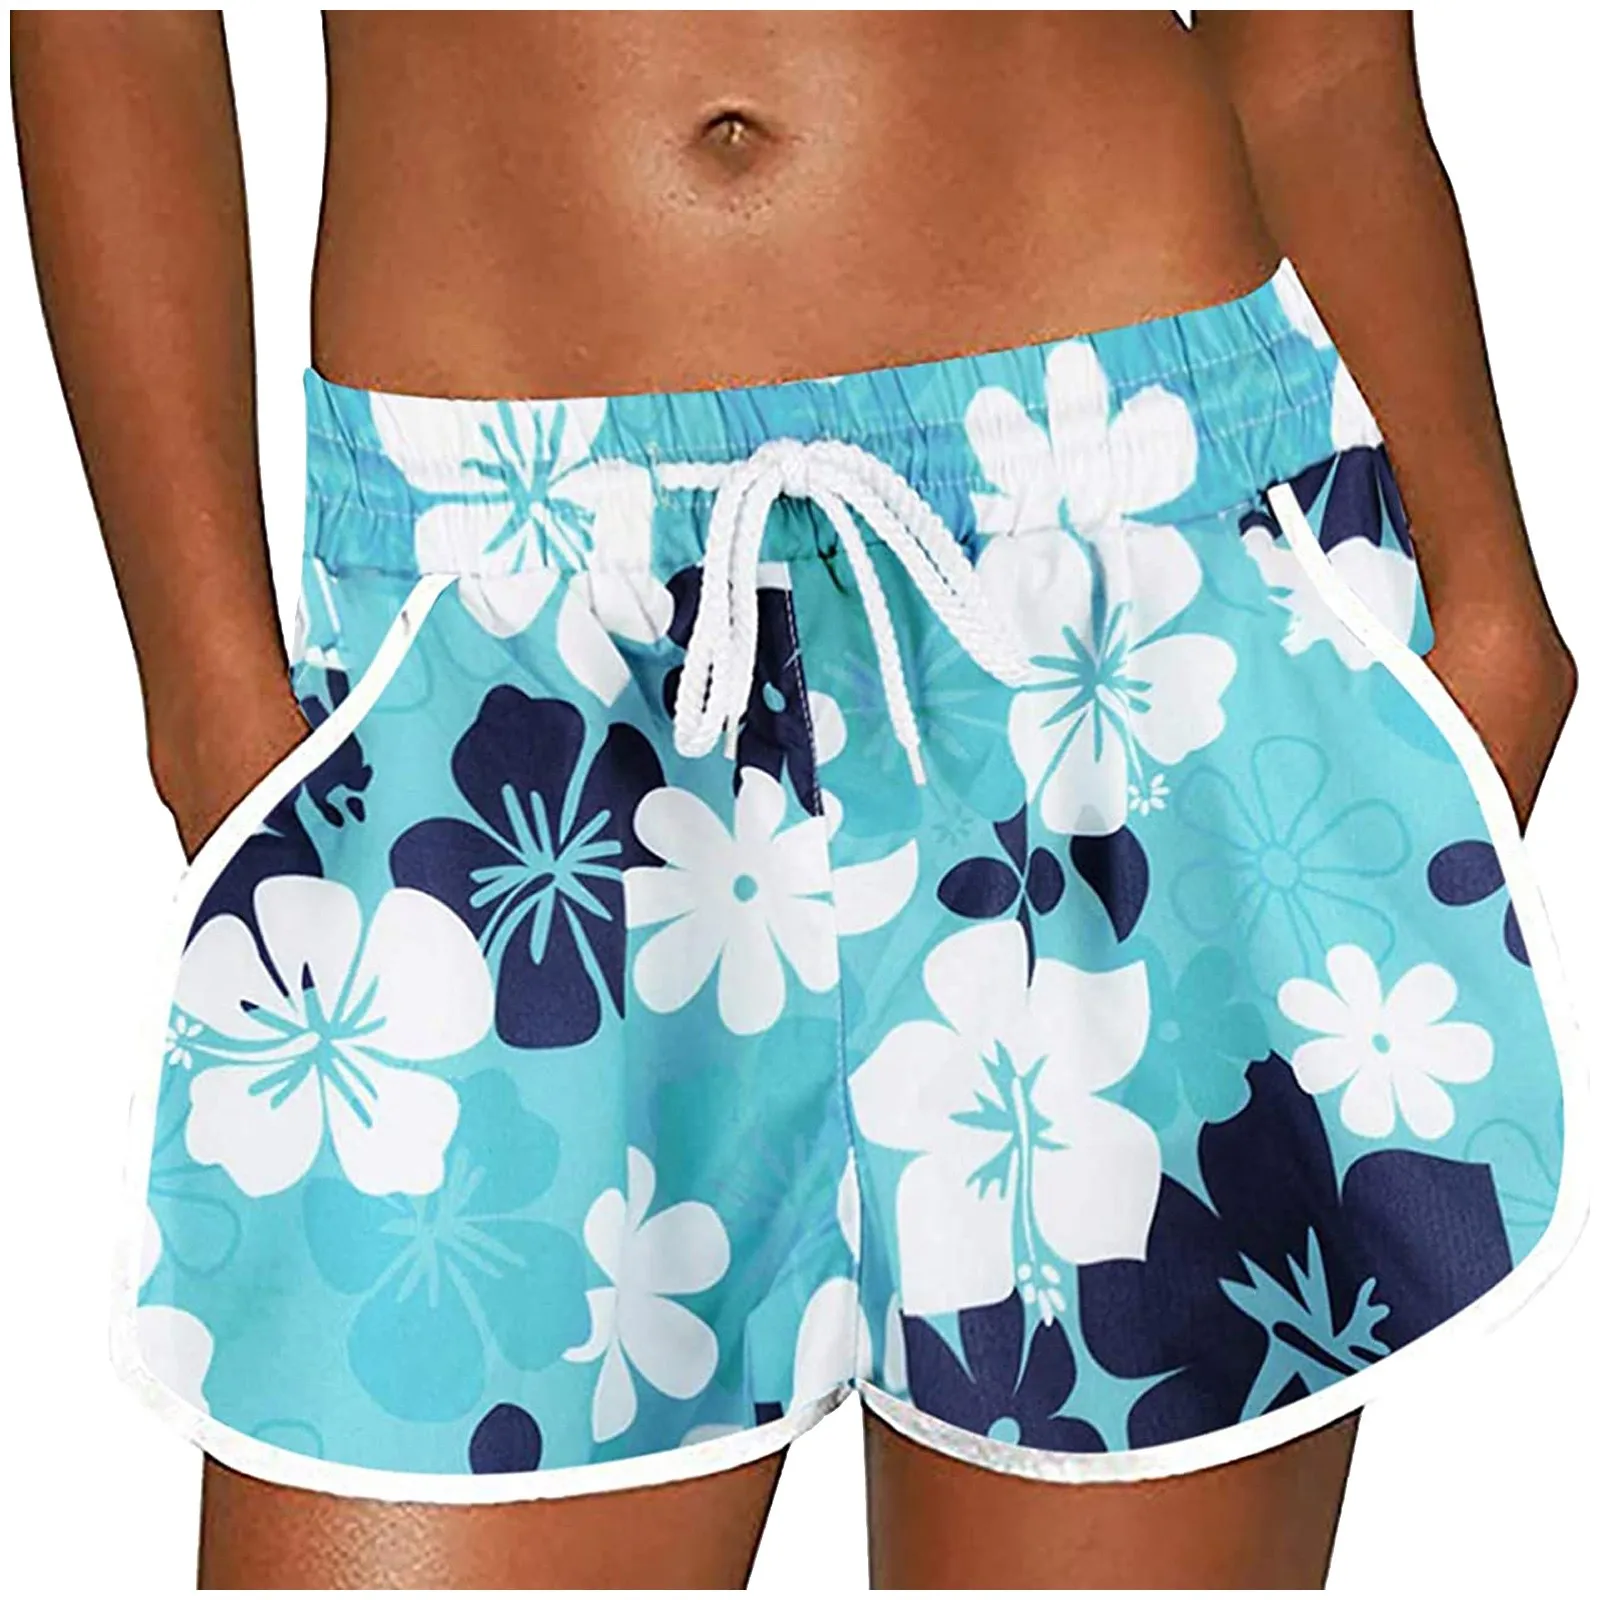 Lace Floral High Waist Beach Shorts Swimwear with Drawstring for Summer Black N /C Female Swimming Trunks 